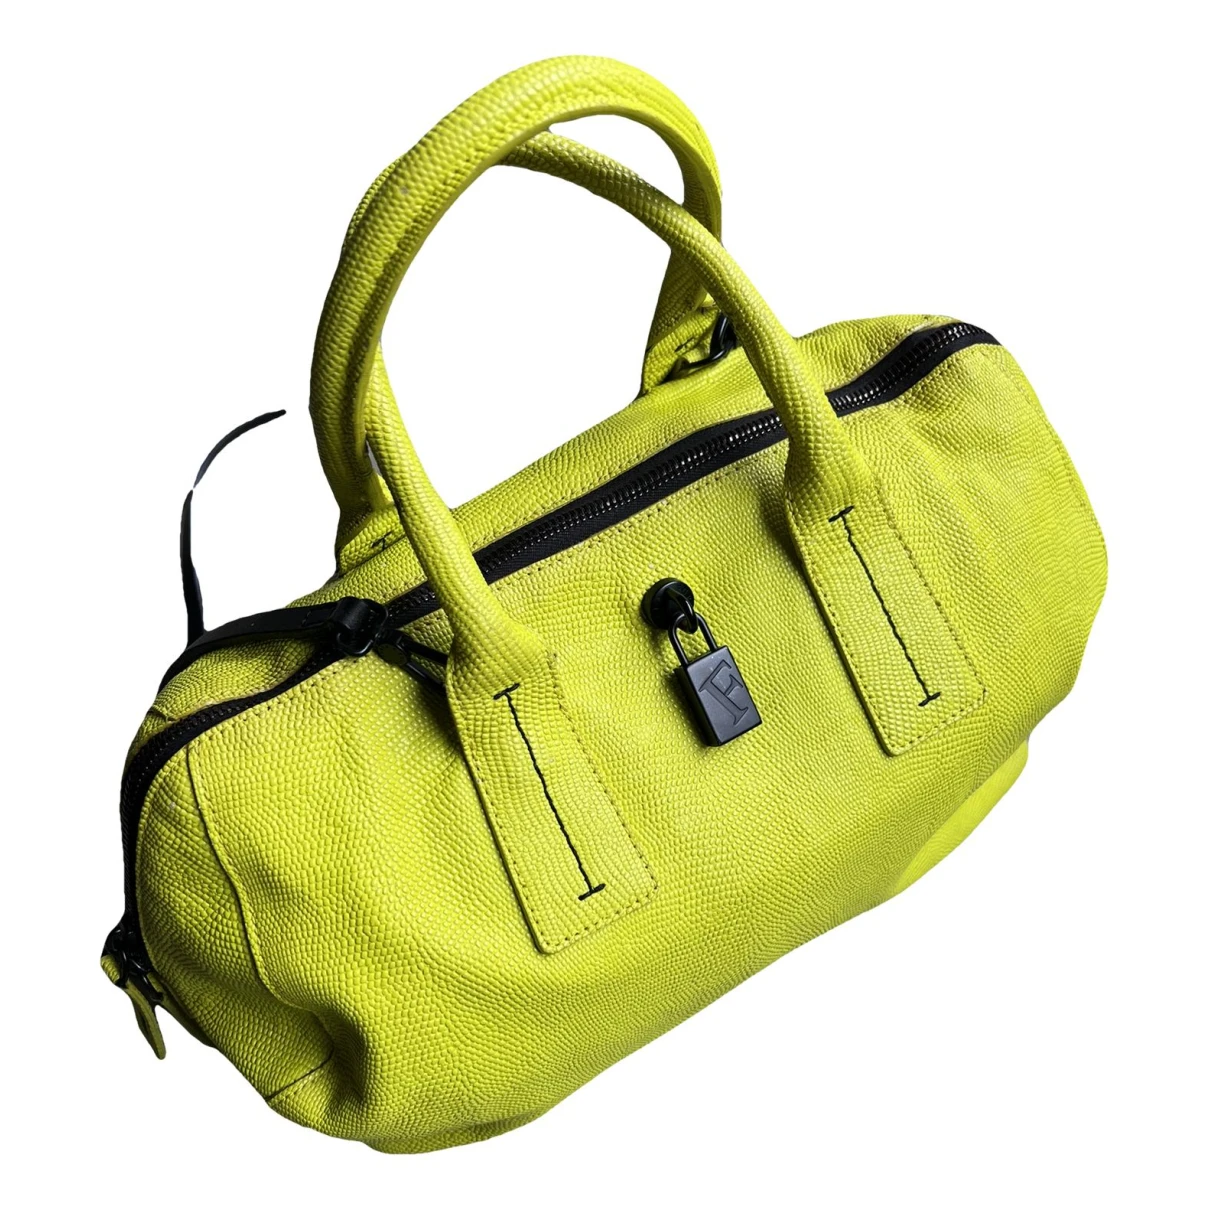 Pre-owned Furla Leather Handbag In Yellow